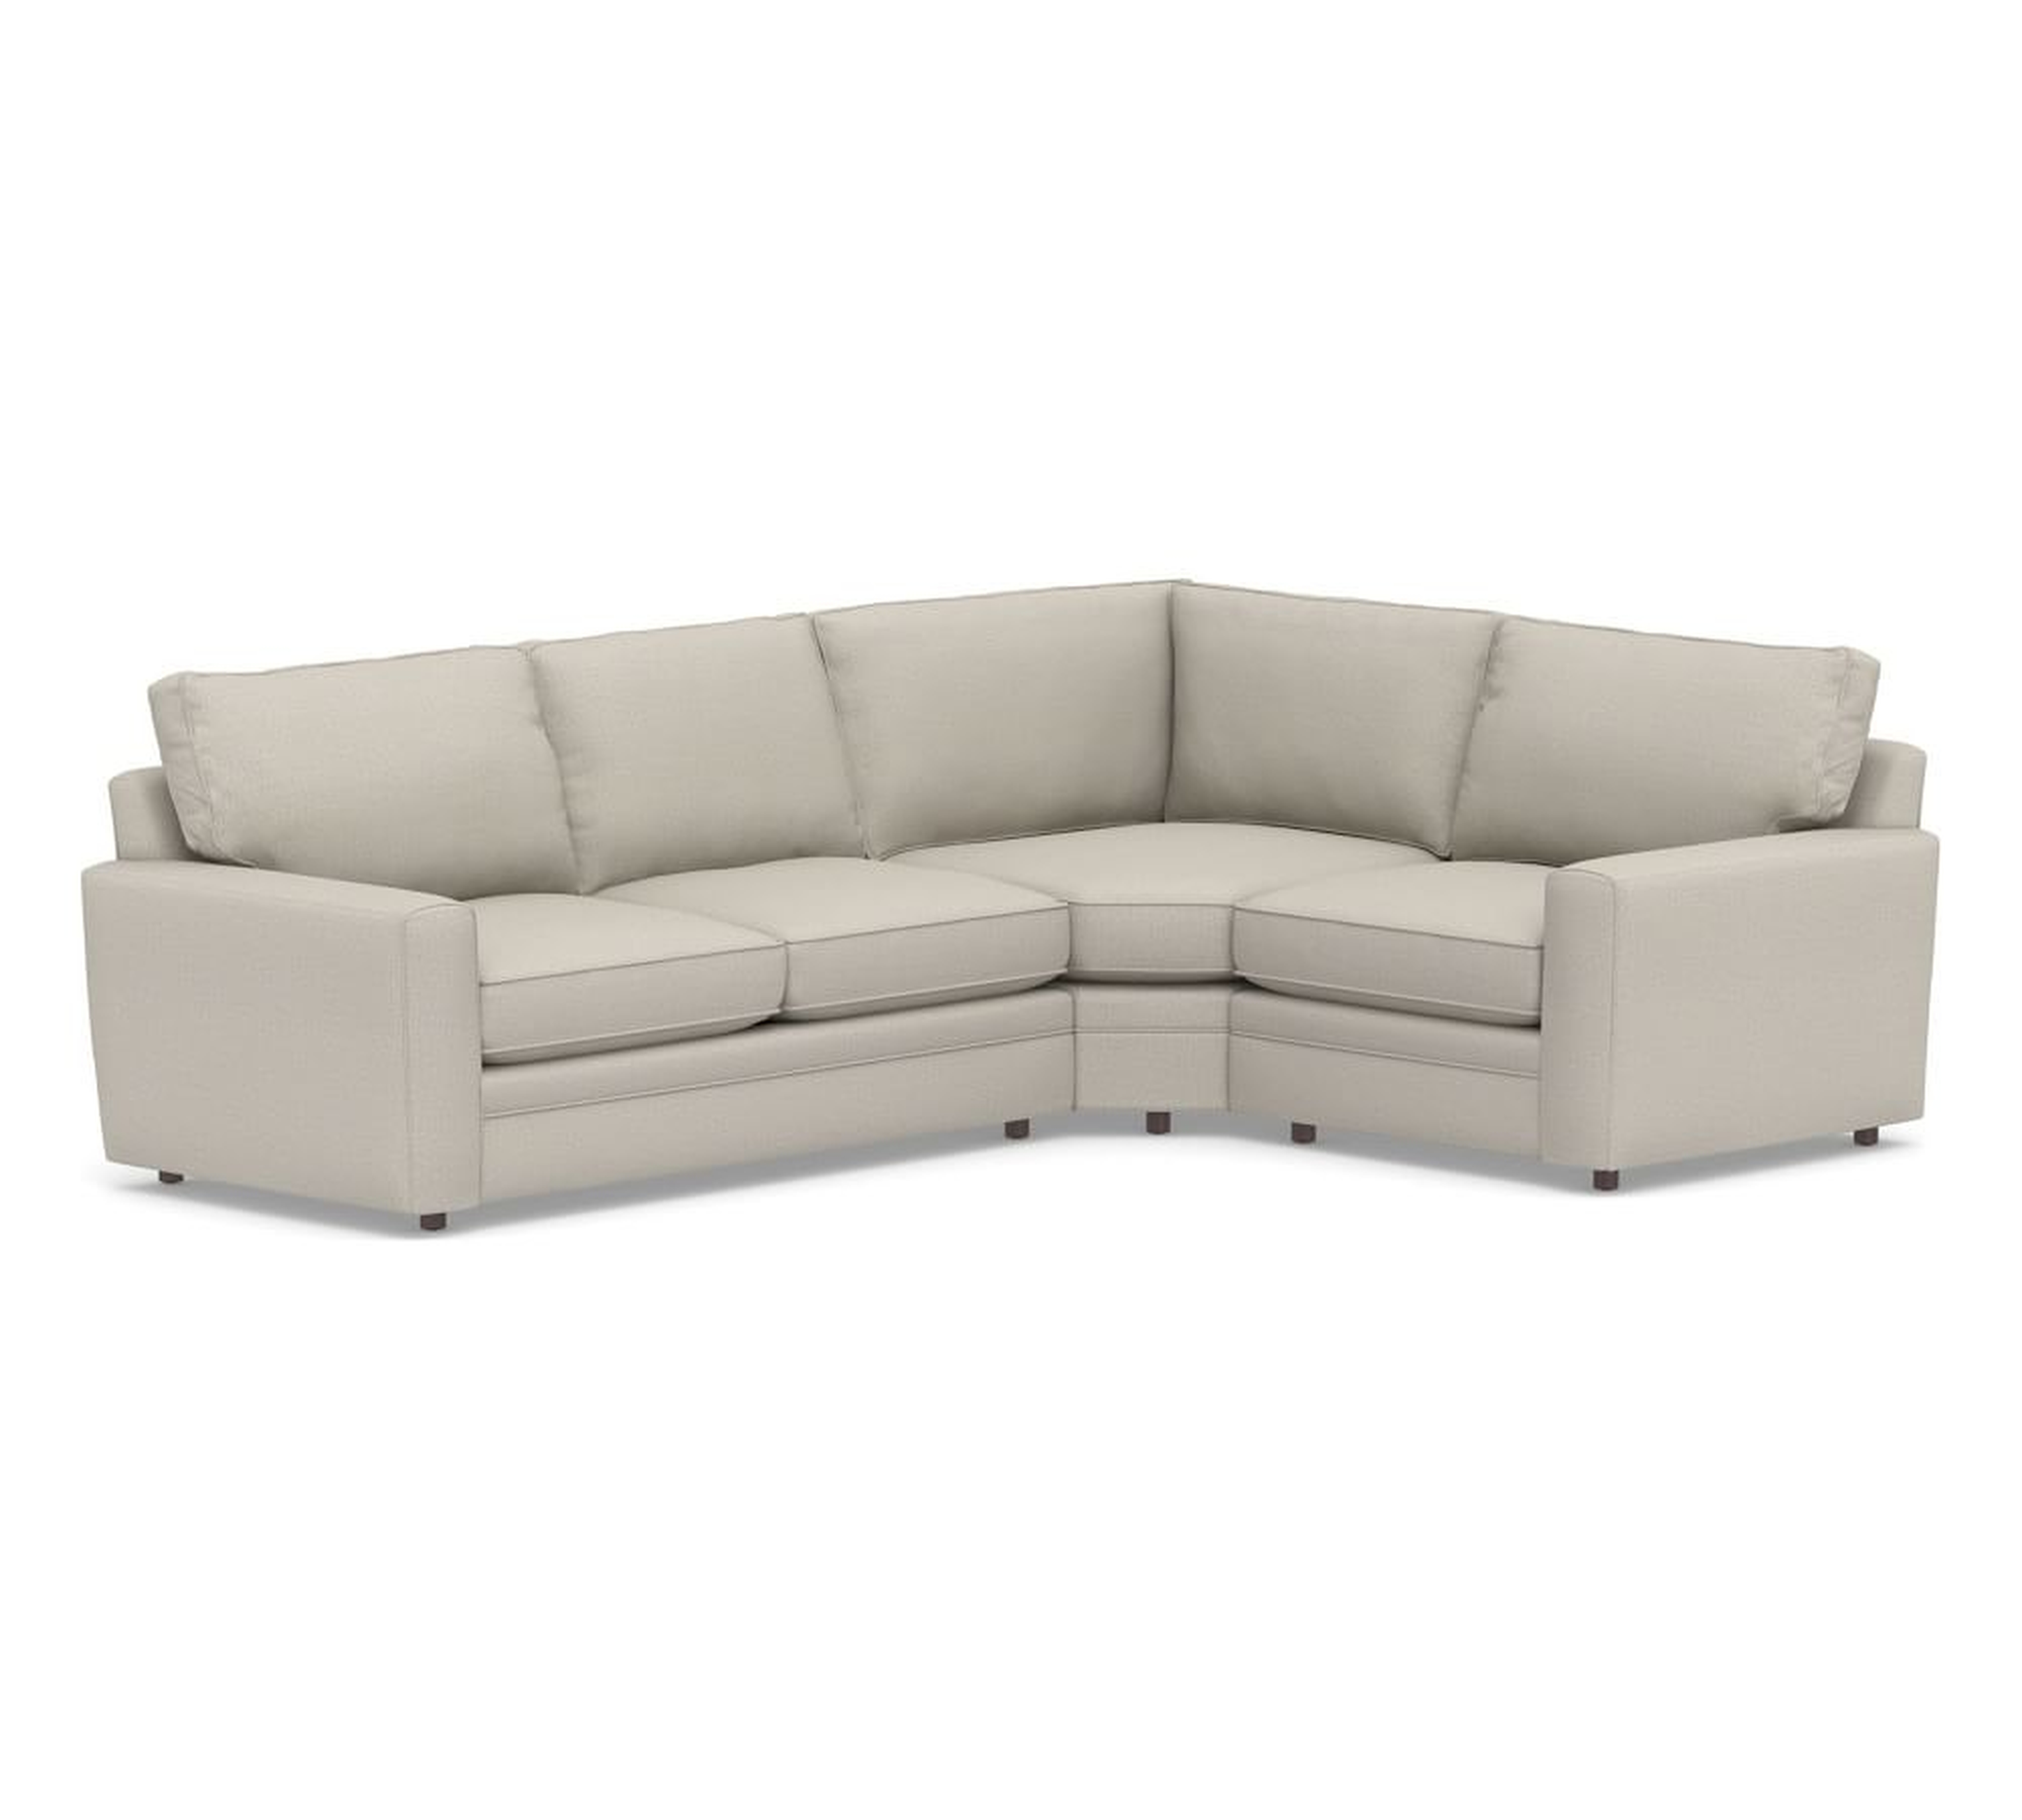 Pearce Square Arm Upholstered Left Arm 3-Piece Wedge Sectional, Down Blend Wrapped Cushions, Performance Heathered Tweed Pebble - Pottery Barn